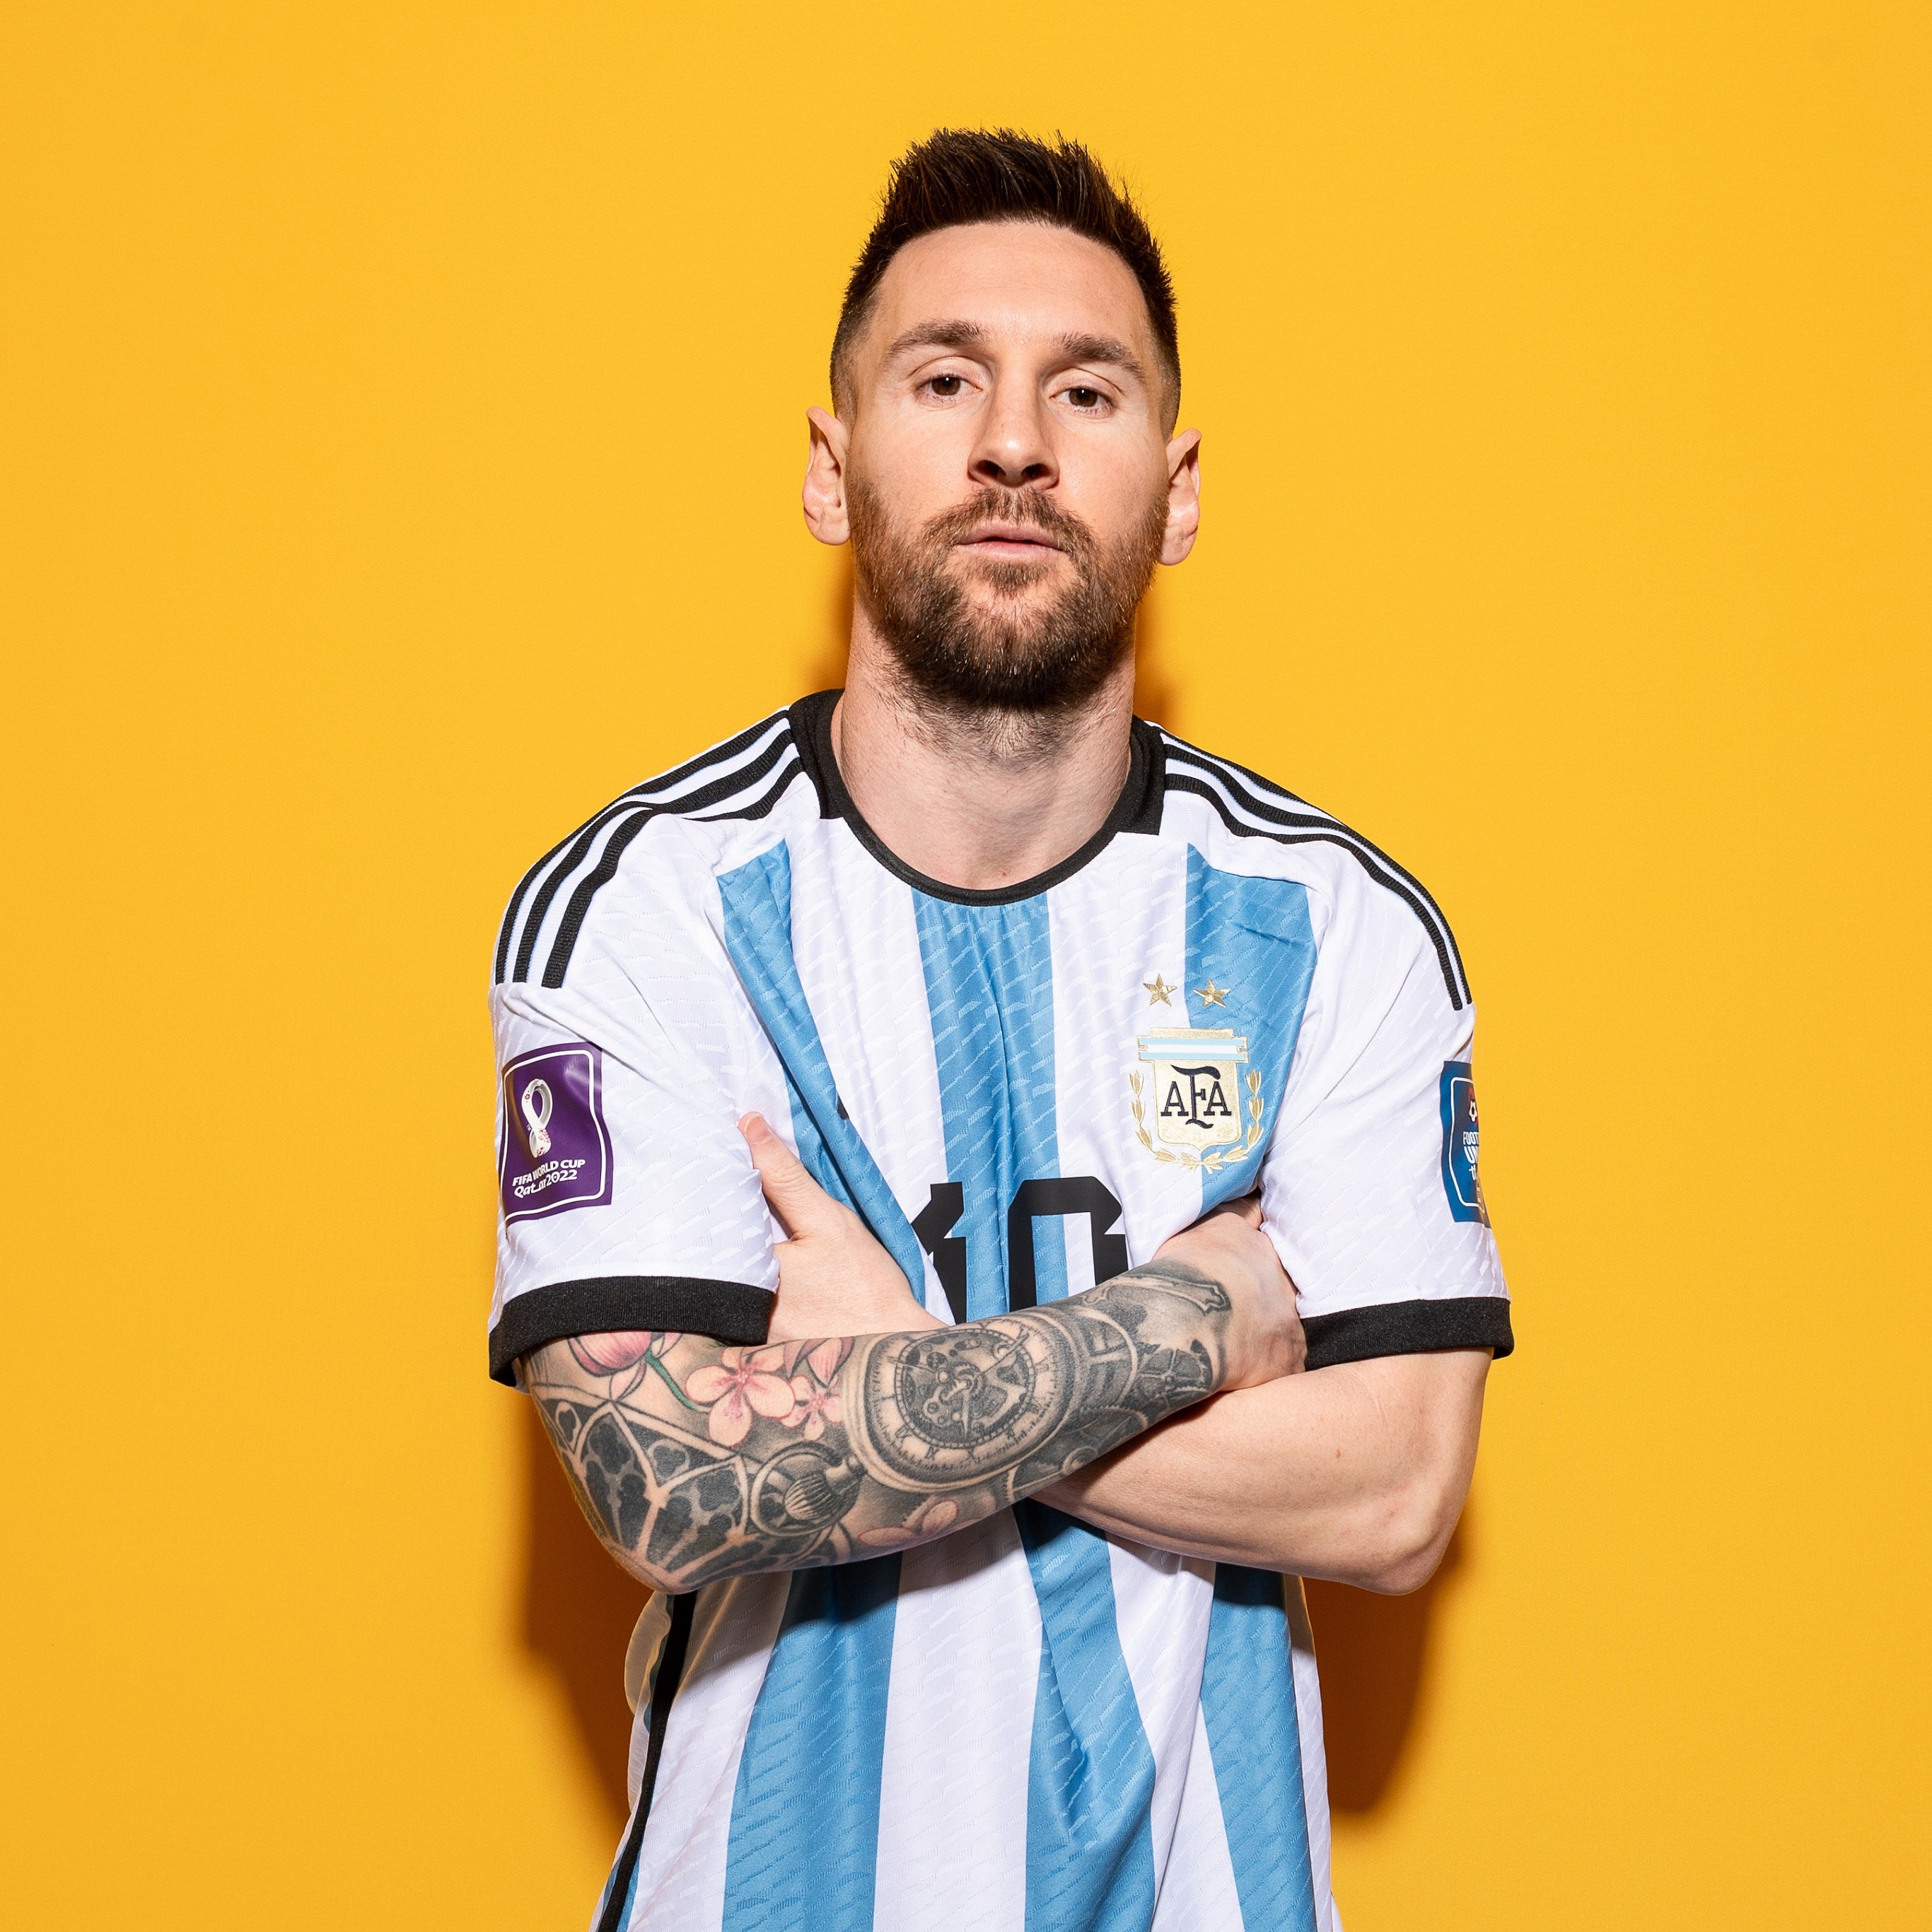 200+] Messi Wallpapers | Wallpapers.com